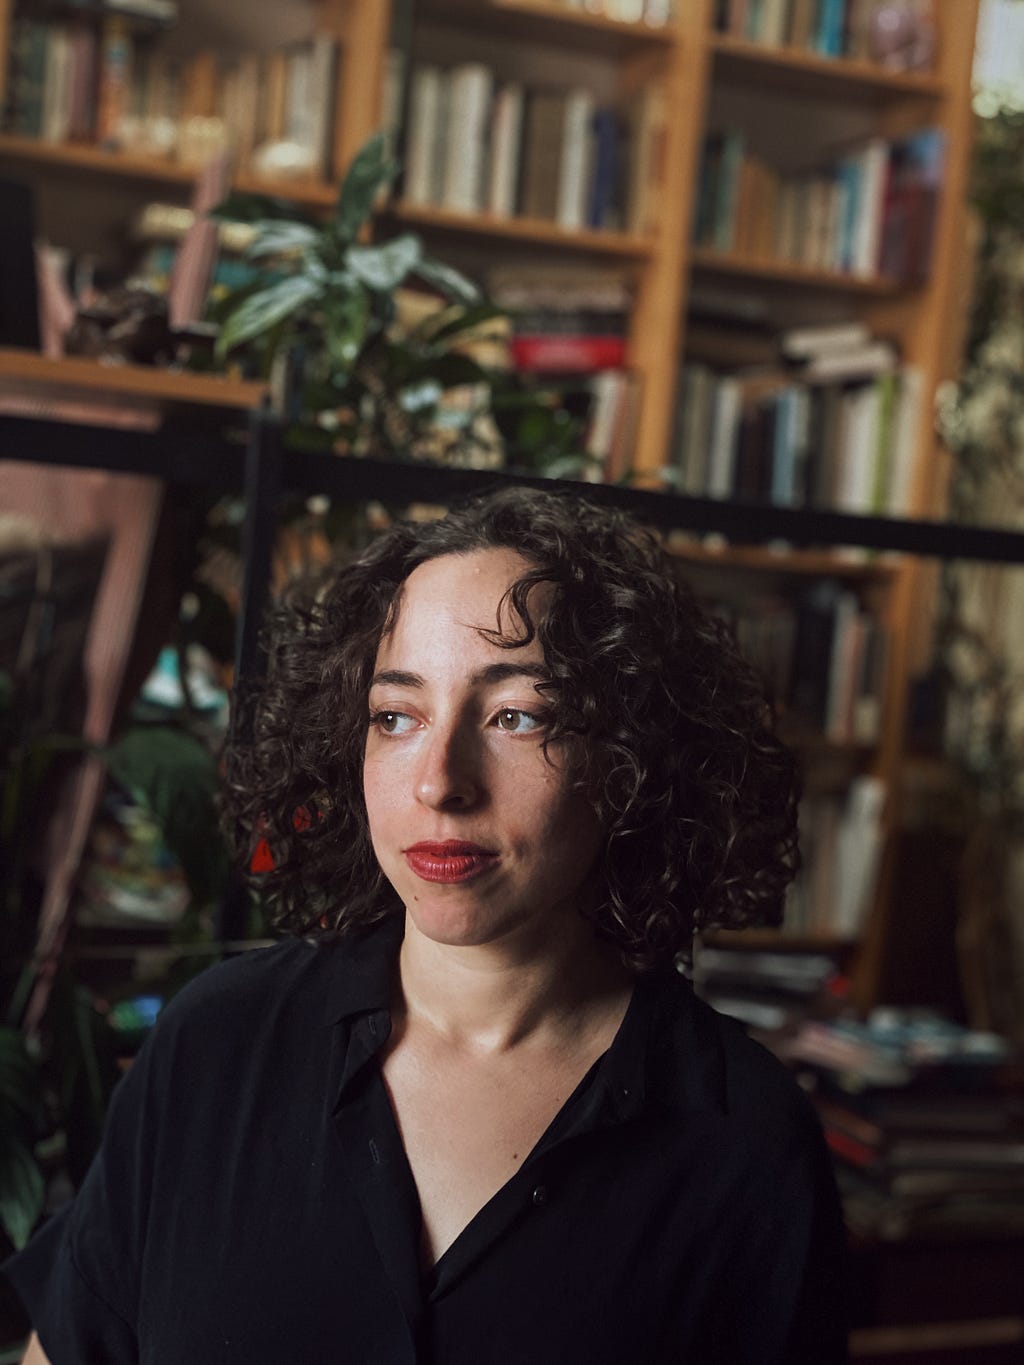 Woman with curly hair in a black shirt, thoughtful in a room full of bookshelves.